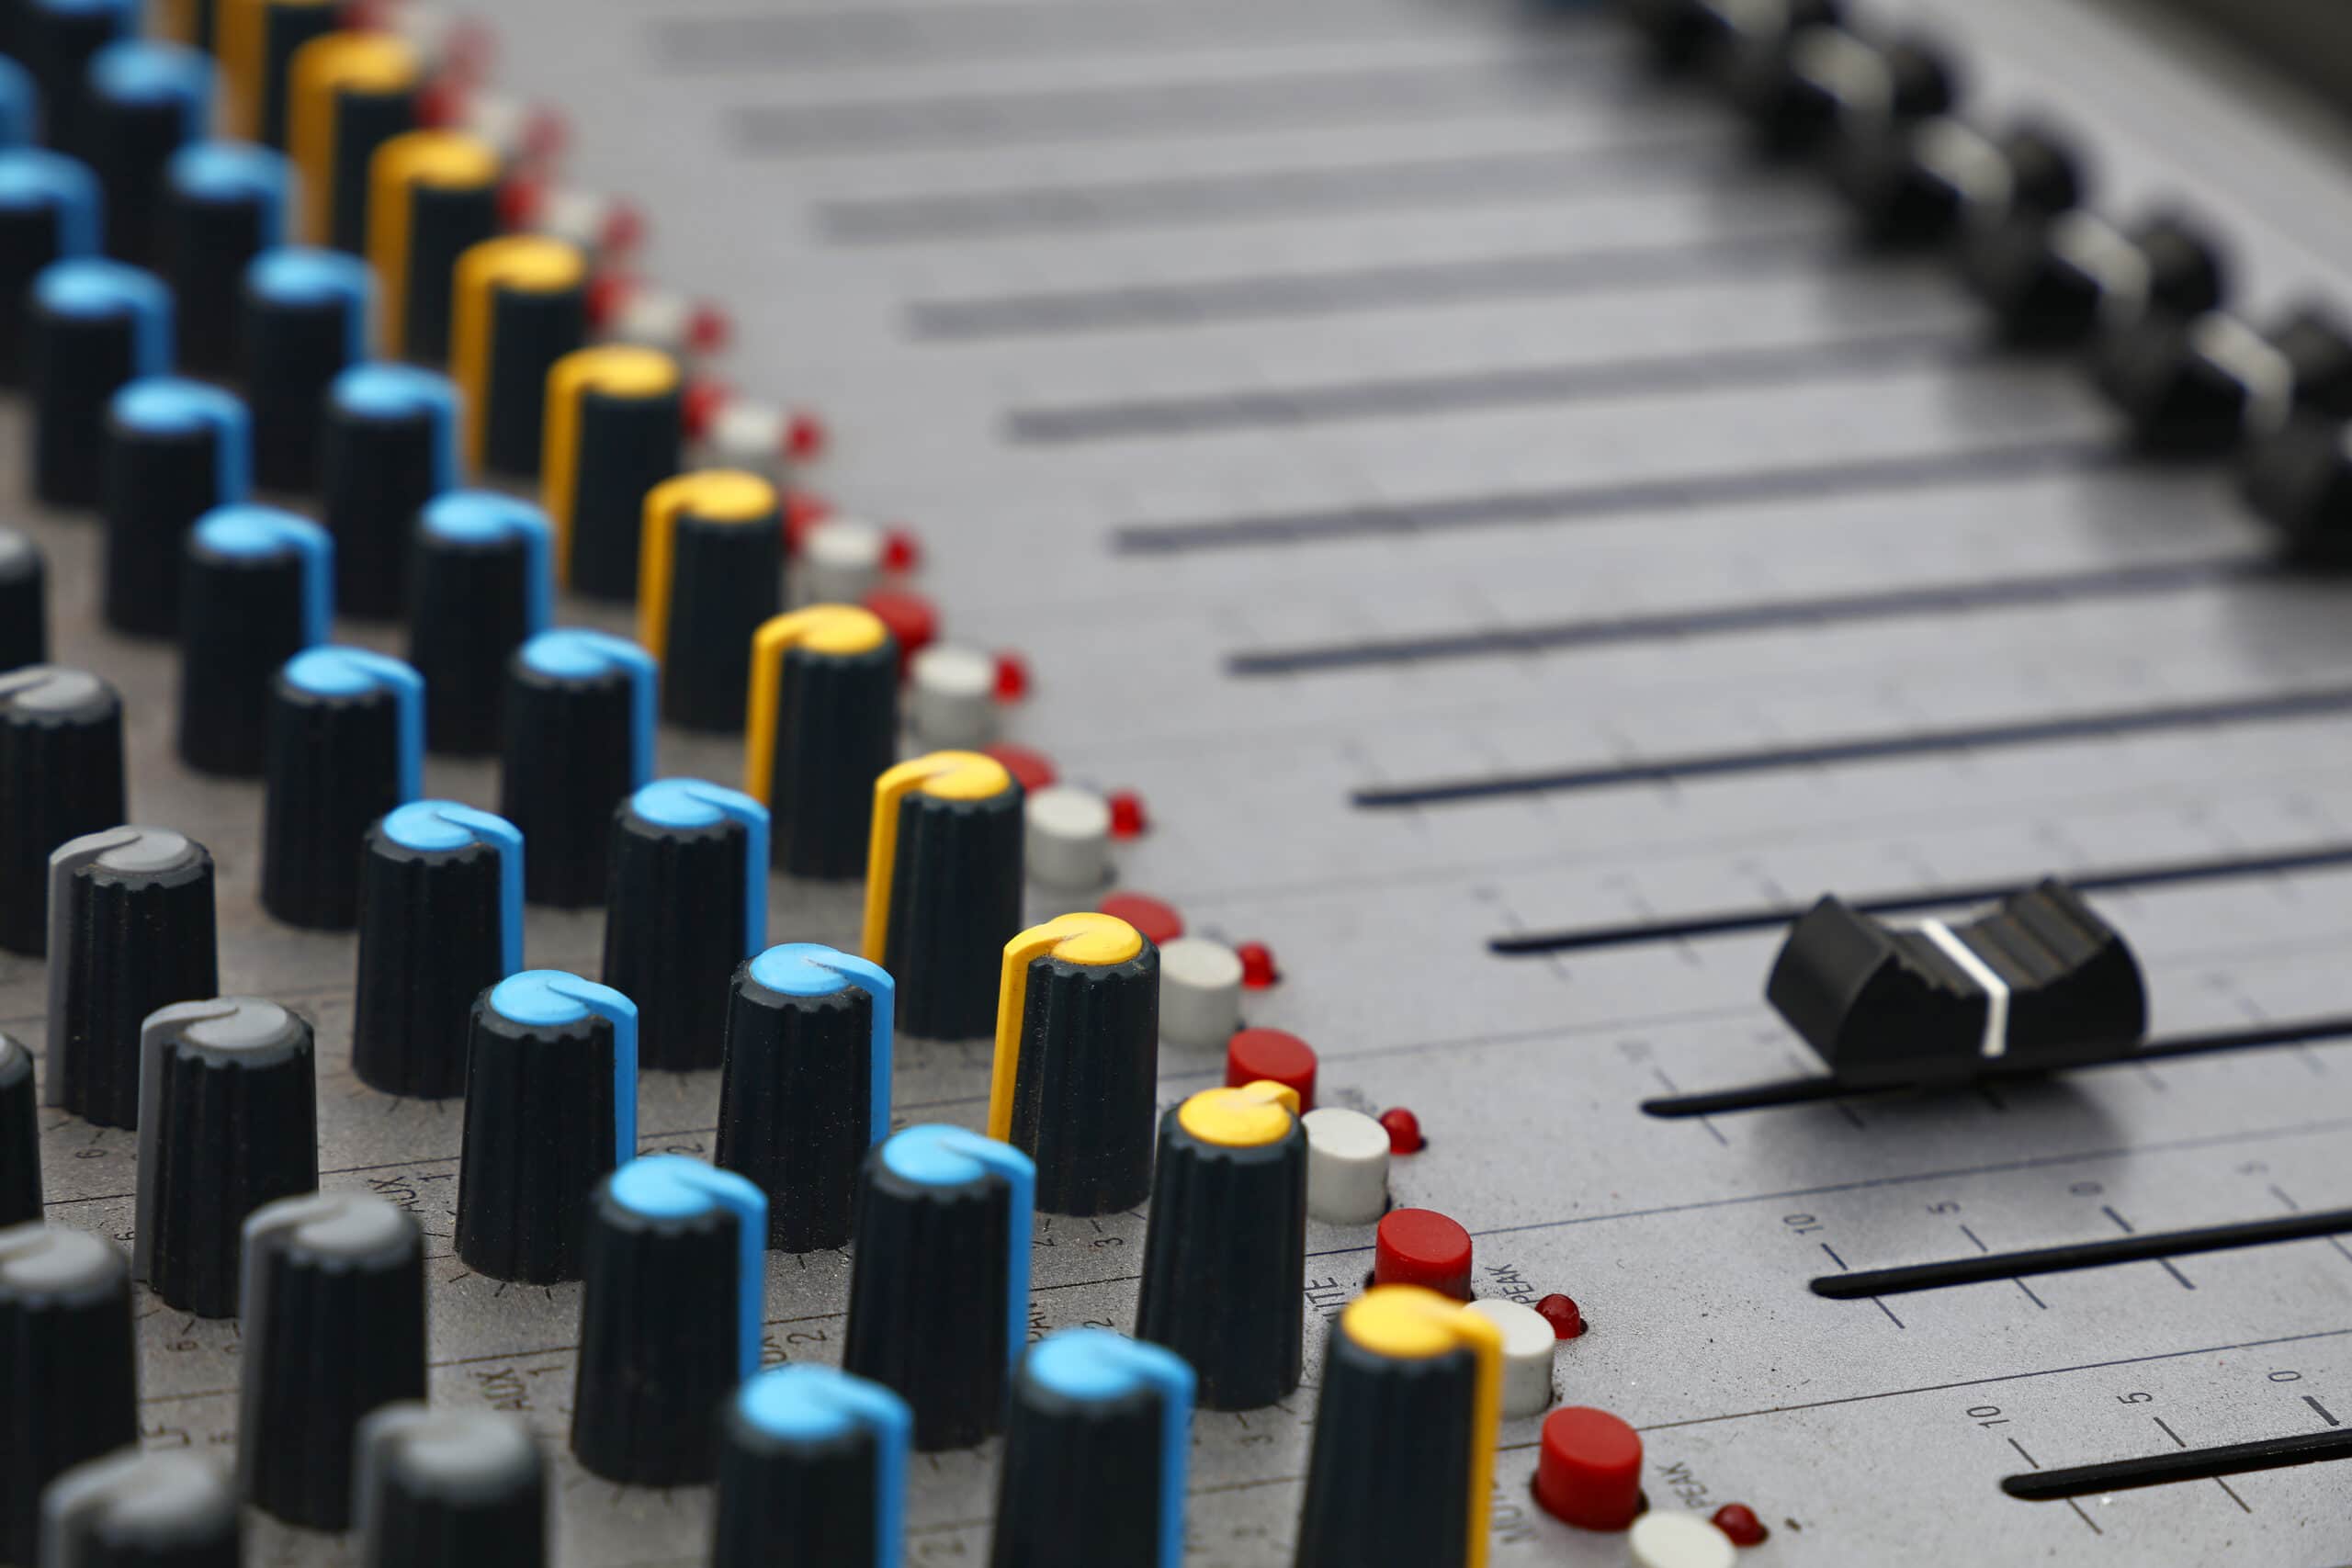 Close-up of audio control sound mixing console board with fader bars, buttons and sliders.